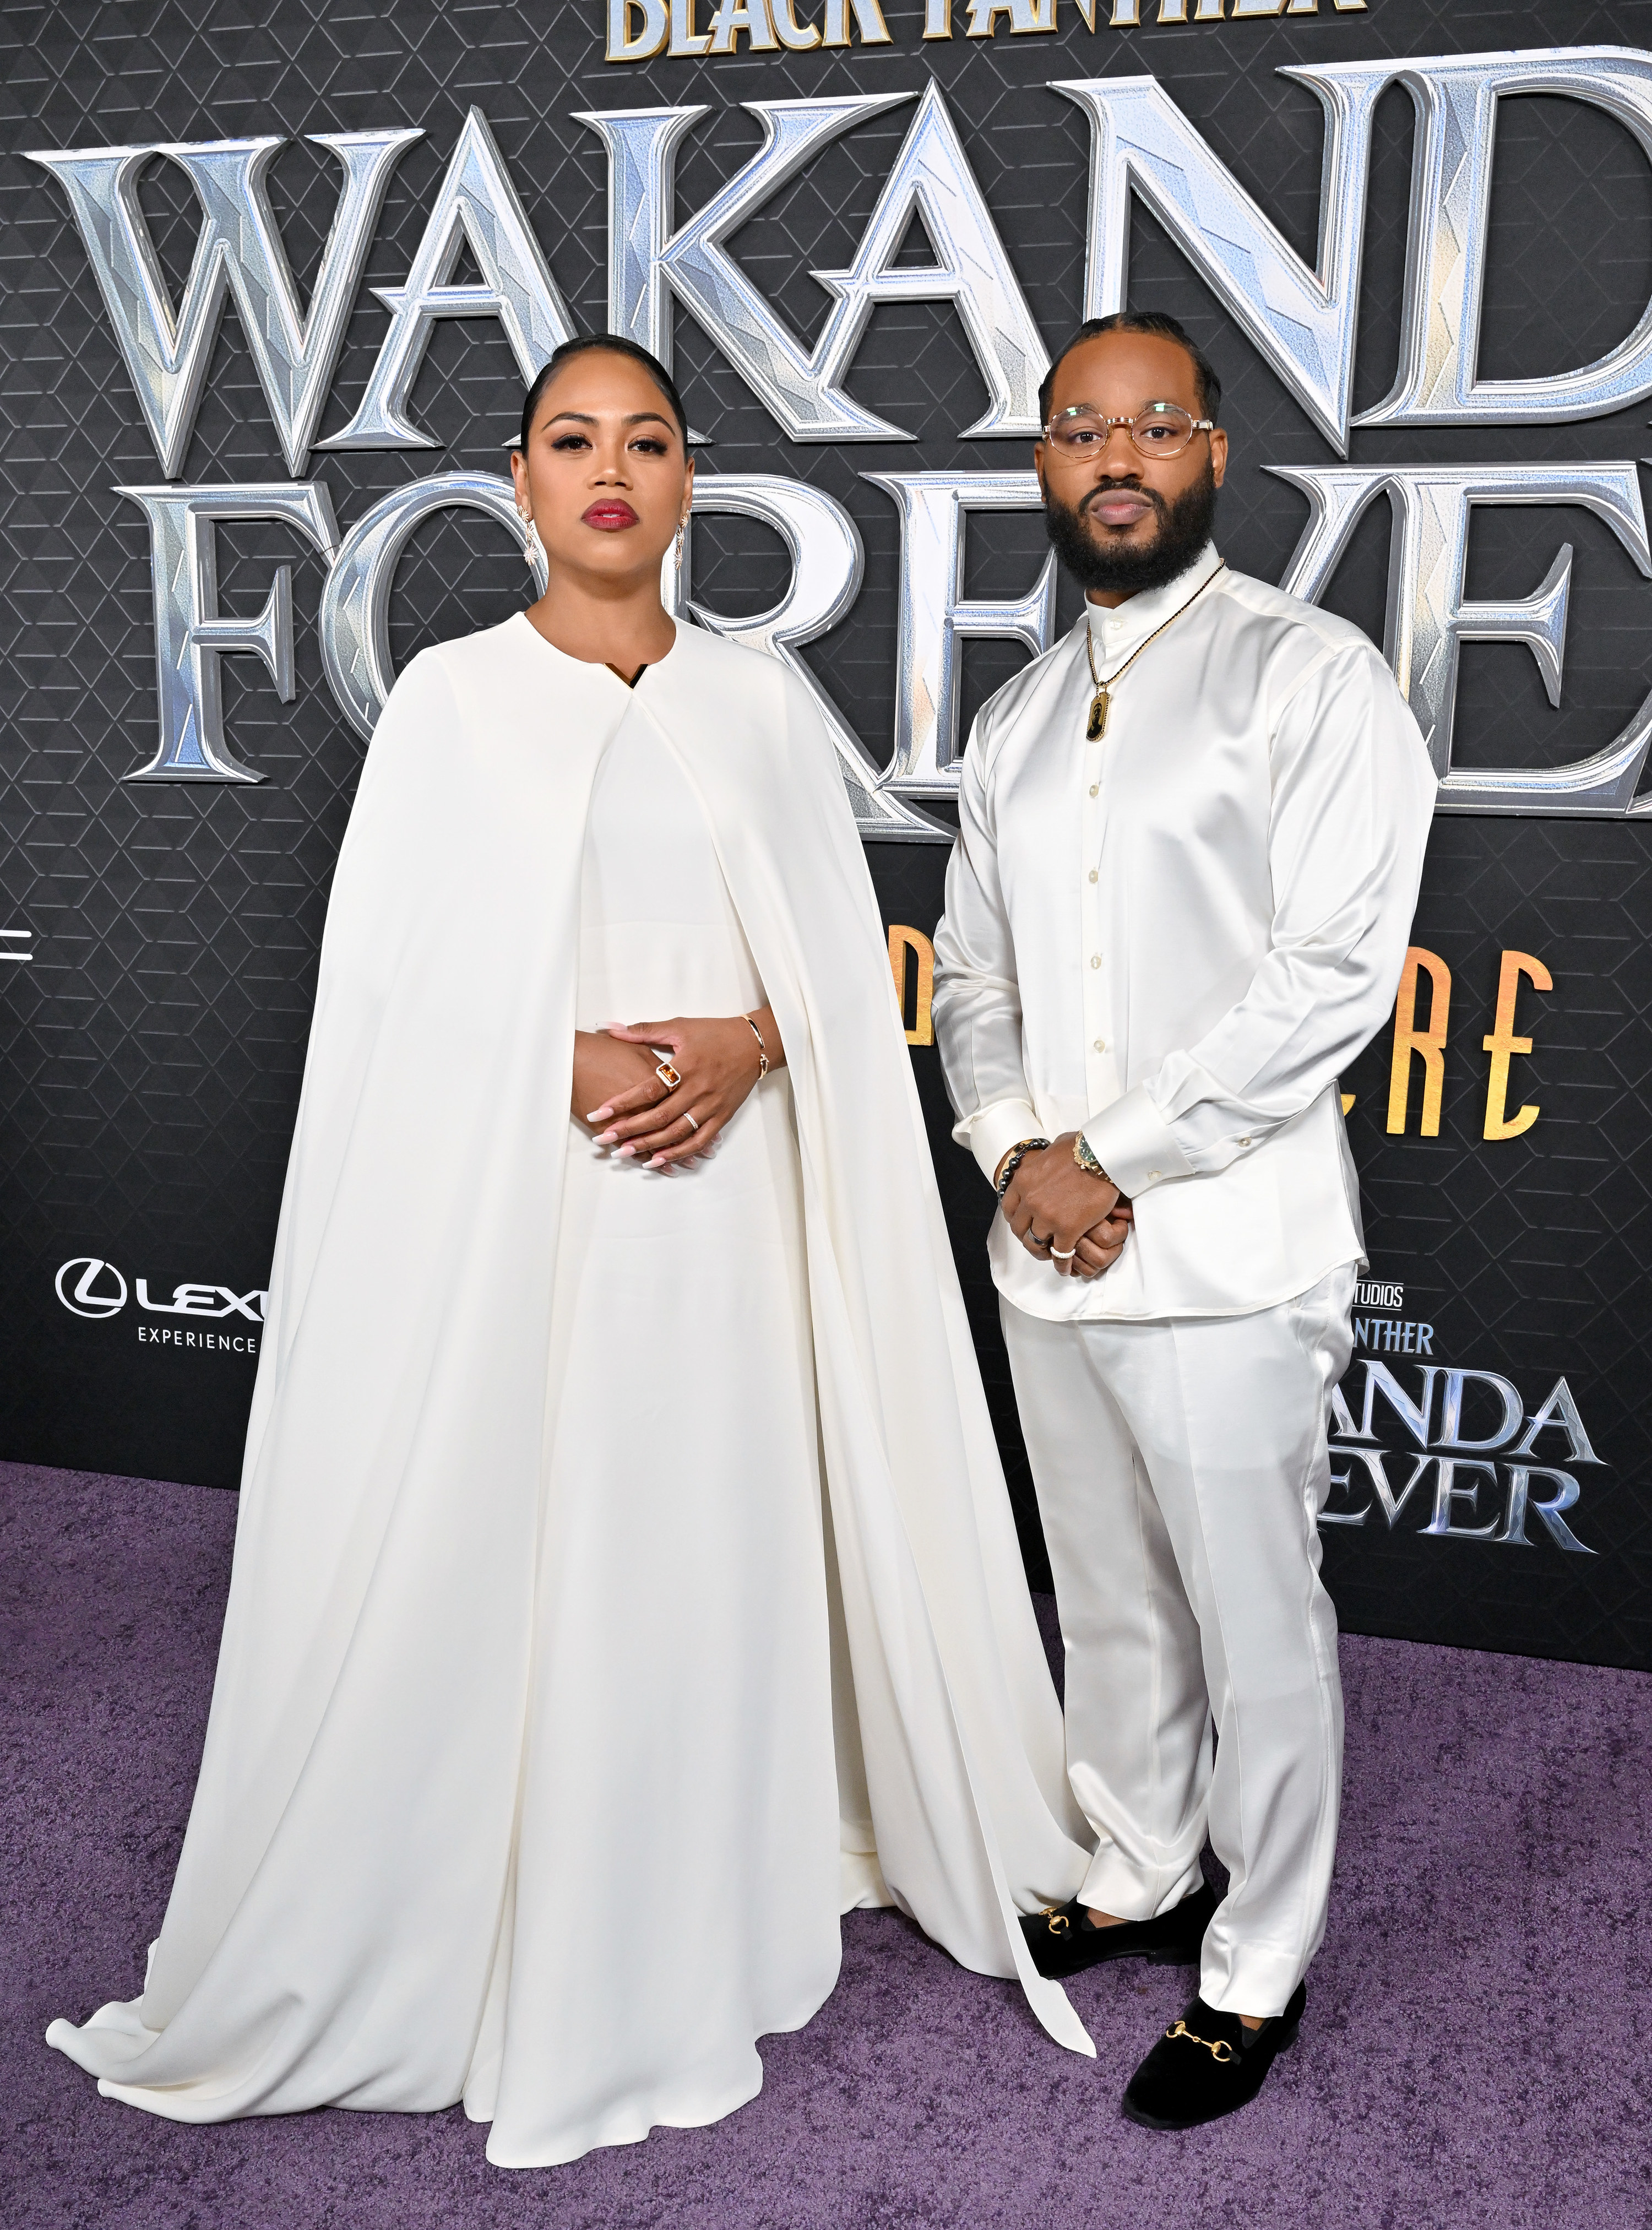 Ryan wore a white silk top and pants with a chain in honor of Chadwick Boseman, and Zinzi wore a white dress with a flowing cape